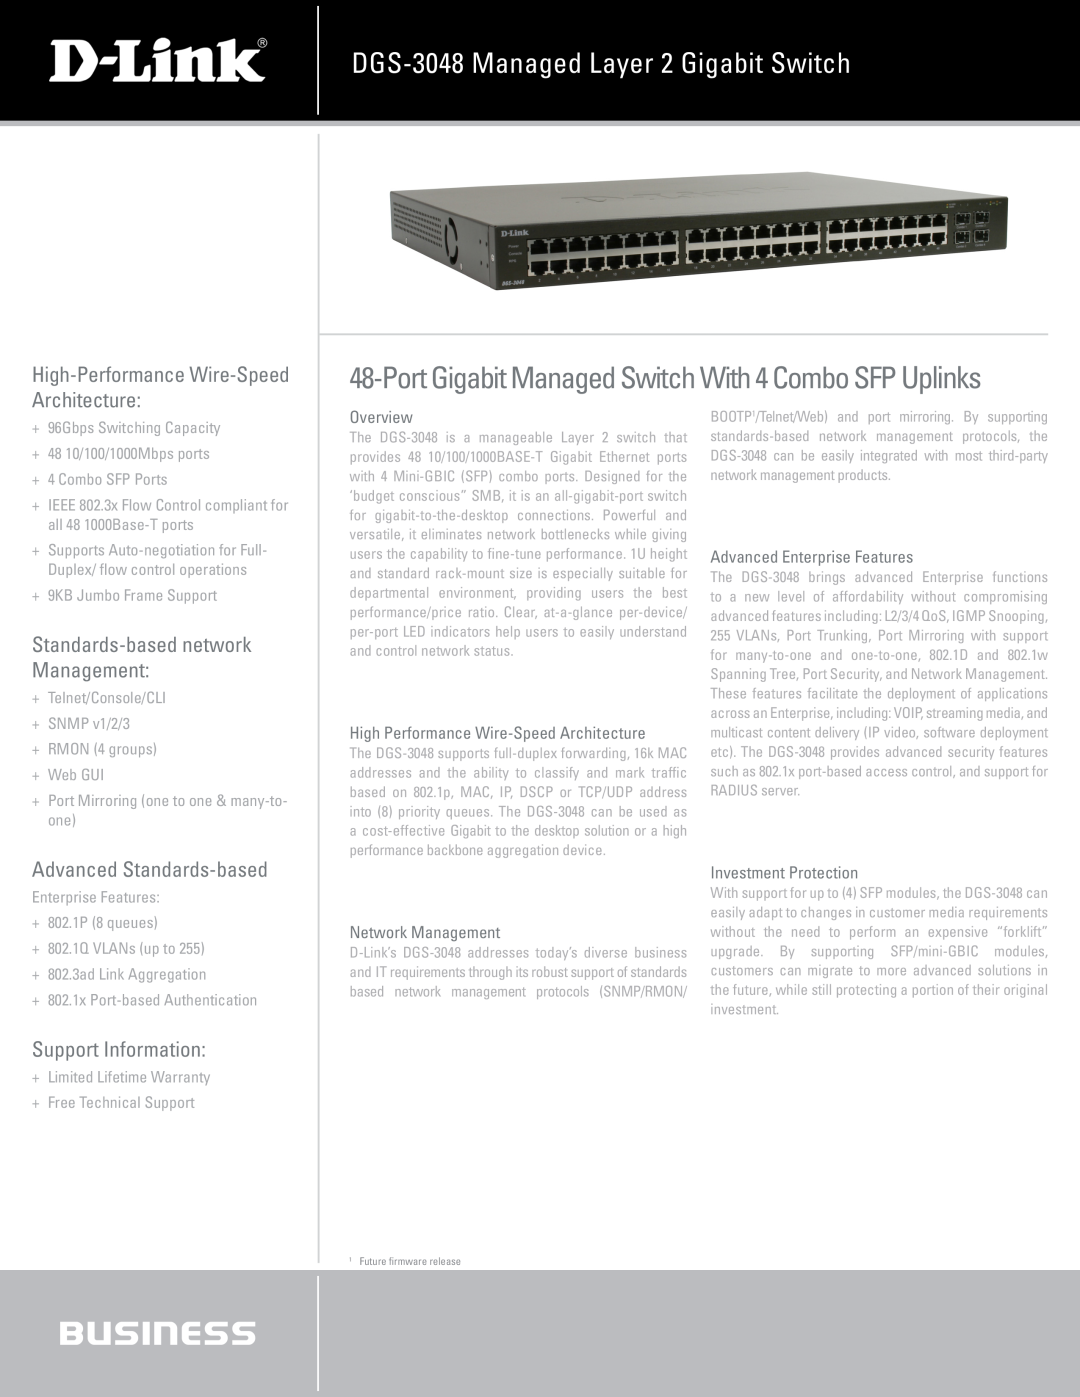 D-Link DGS-3048 warranty Port Gigabit Managed Switch With 4 Combo SFP Uplinks, High-Performance Wire-Speed Architecture 